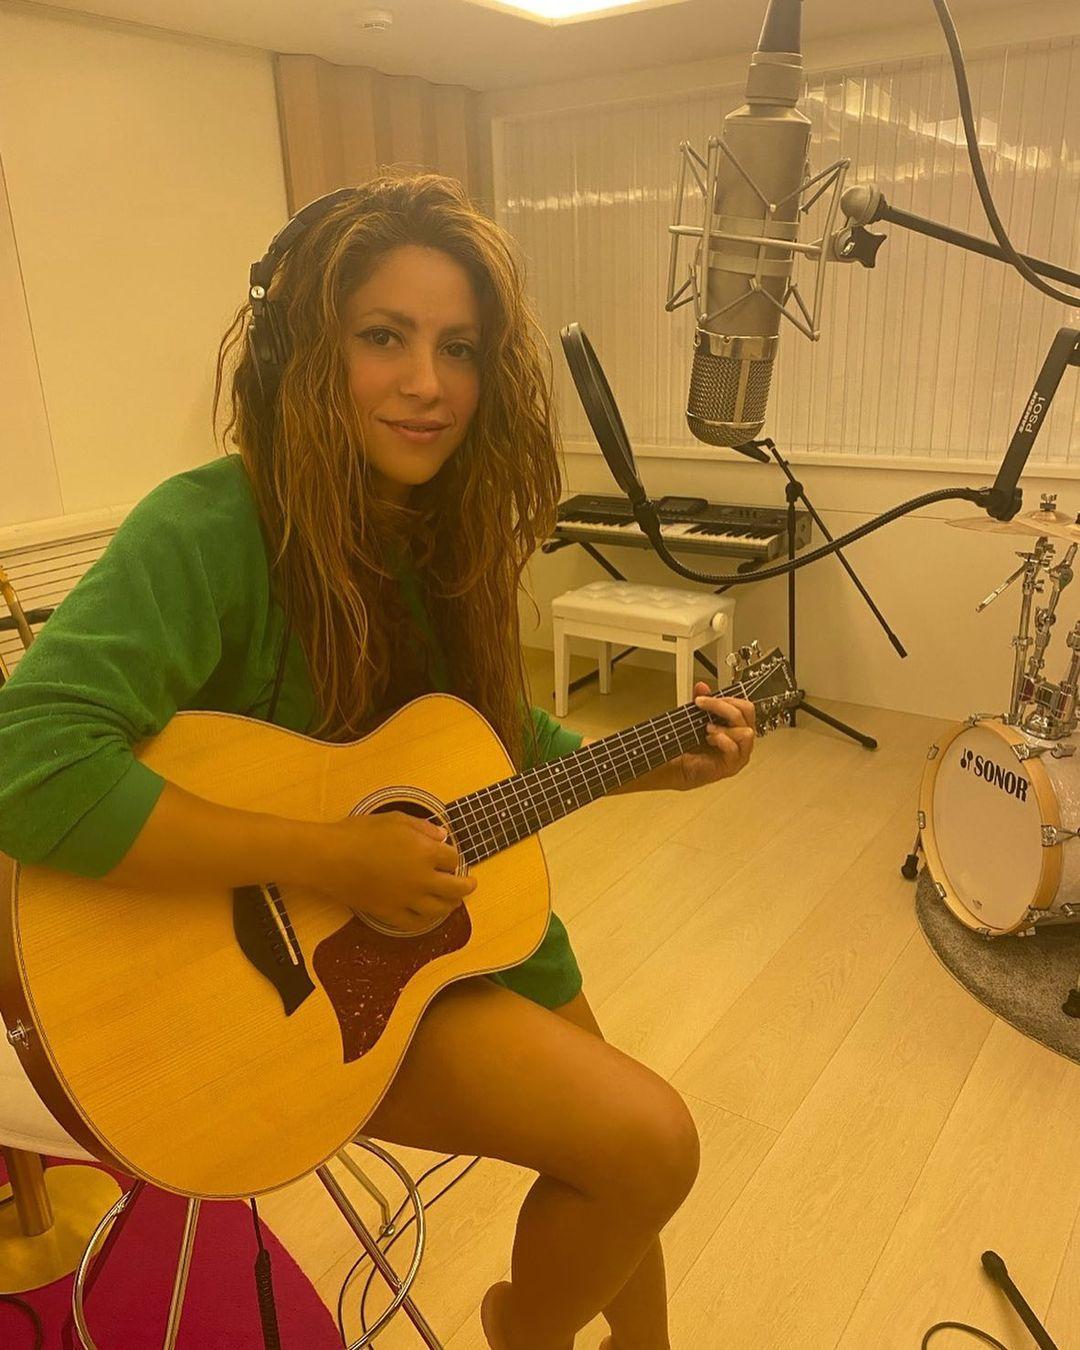 Shakira is playing acoustic guitar in a small recording studio.